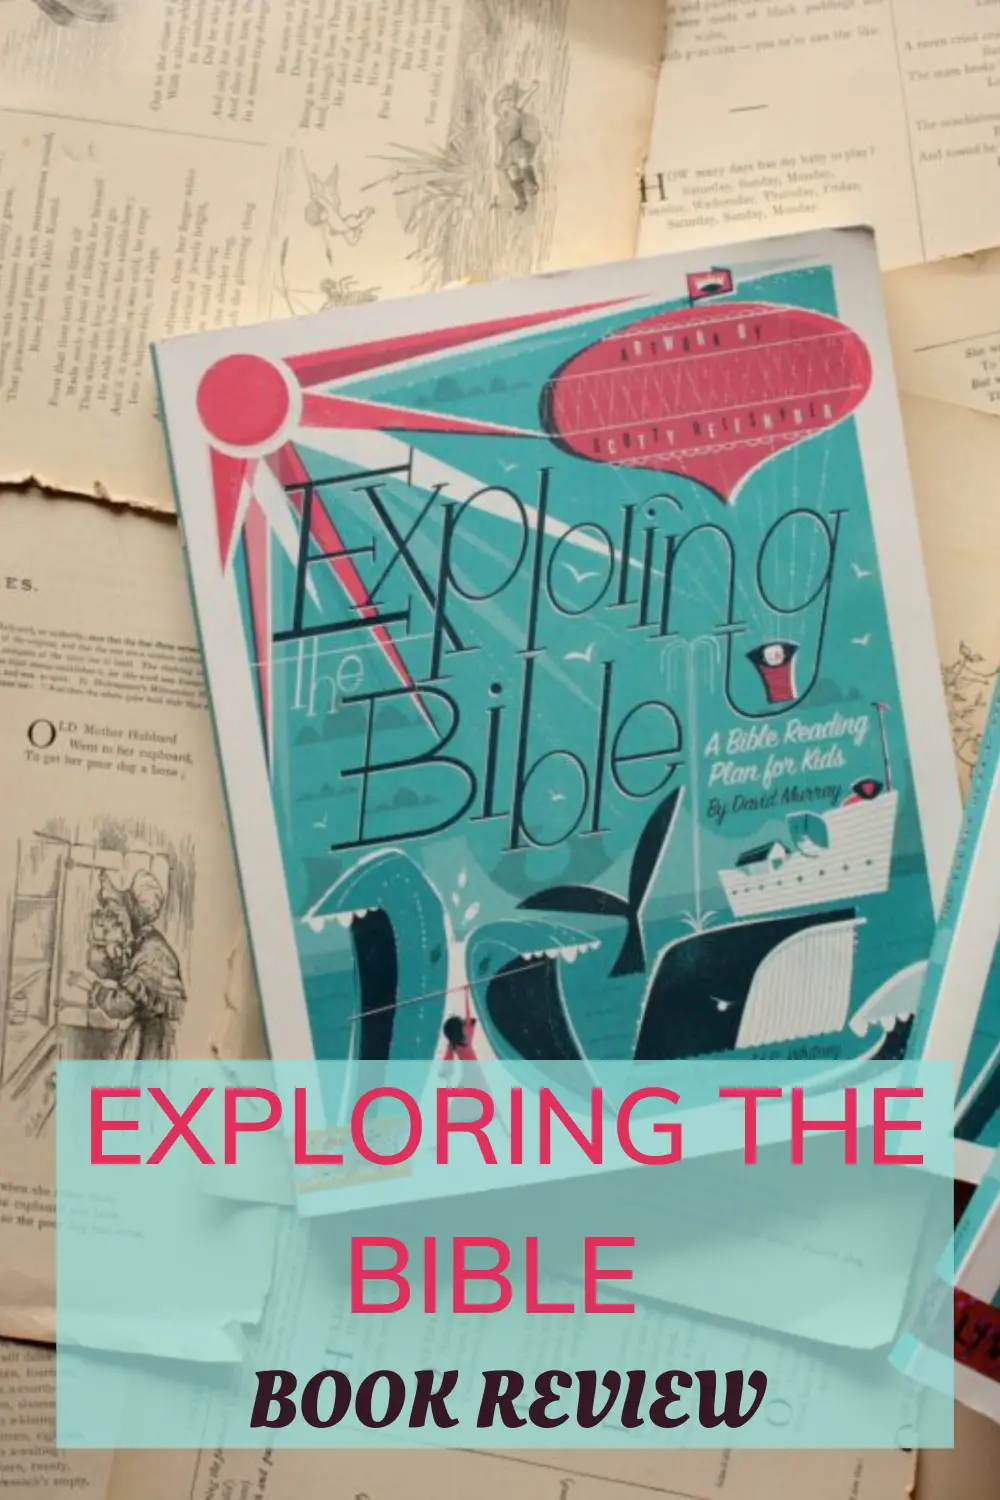 Exploring the Bible by David Murray (Crossway), book review by The Hope-Filled Family, UK Christian parenting and adoption blog.